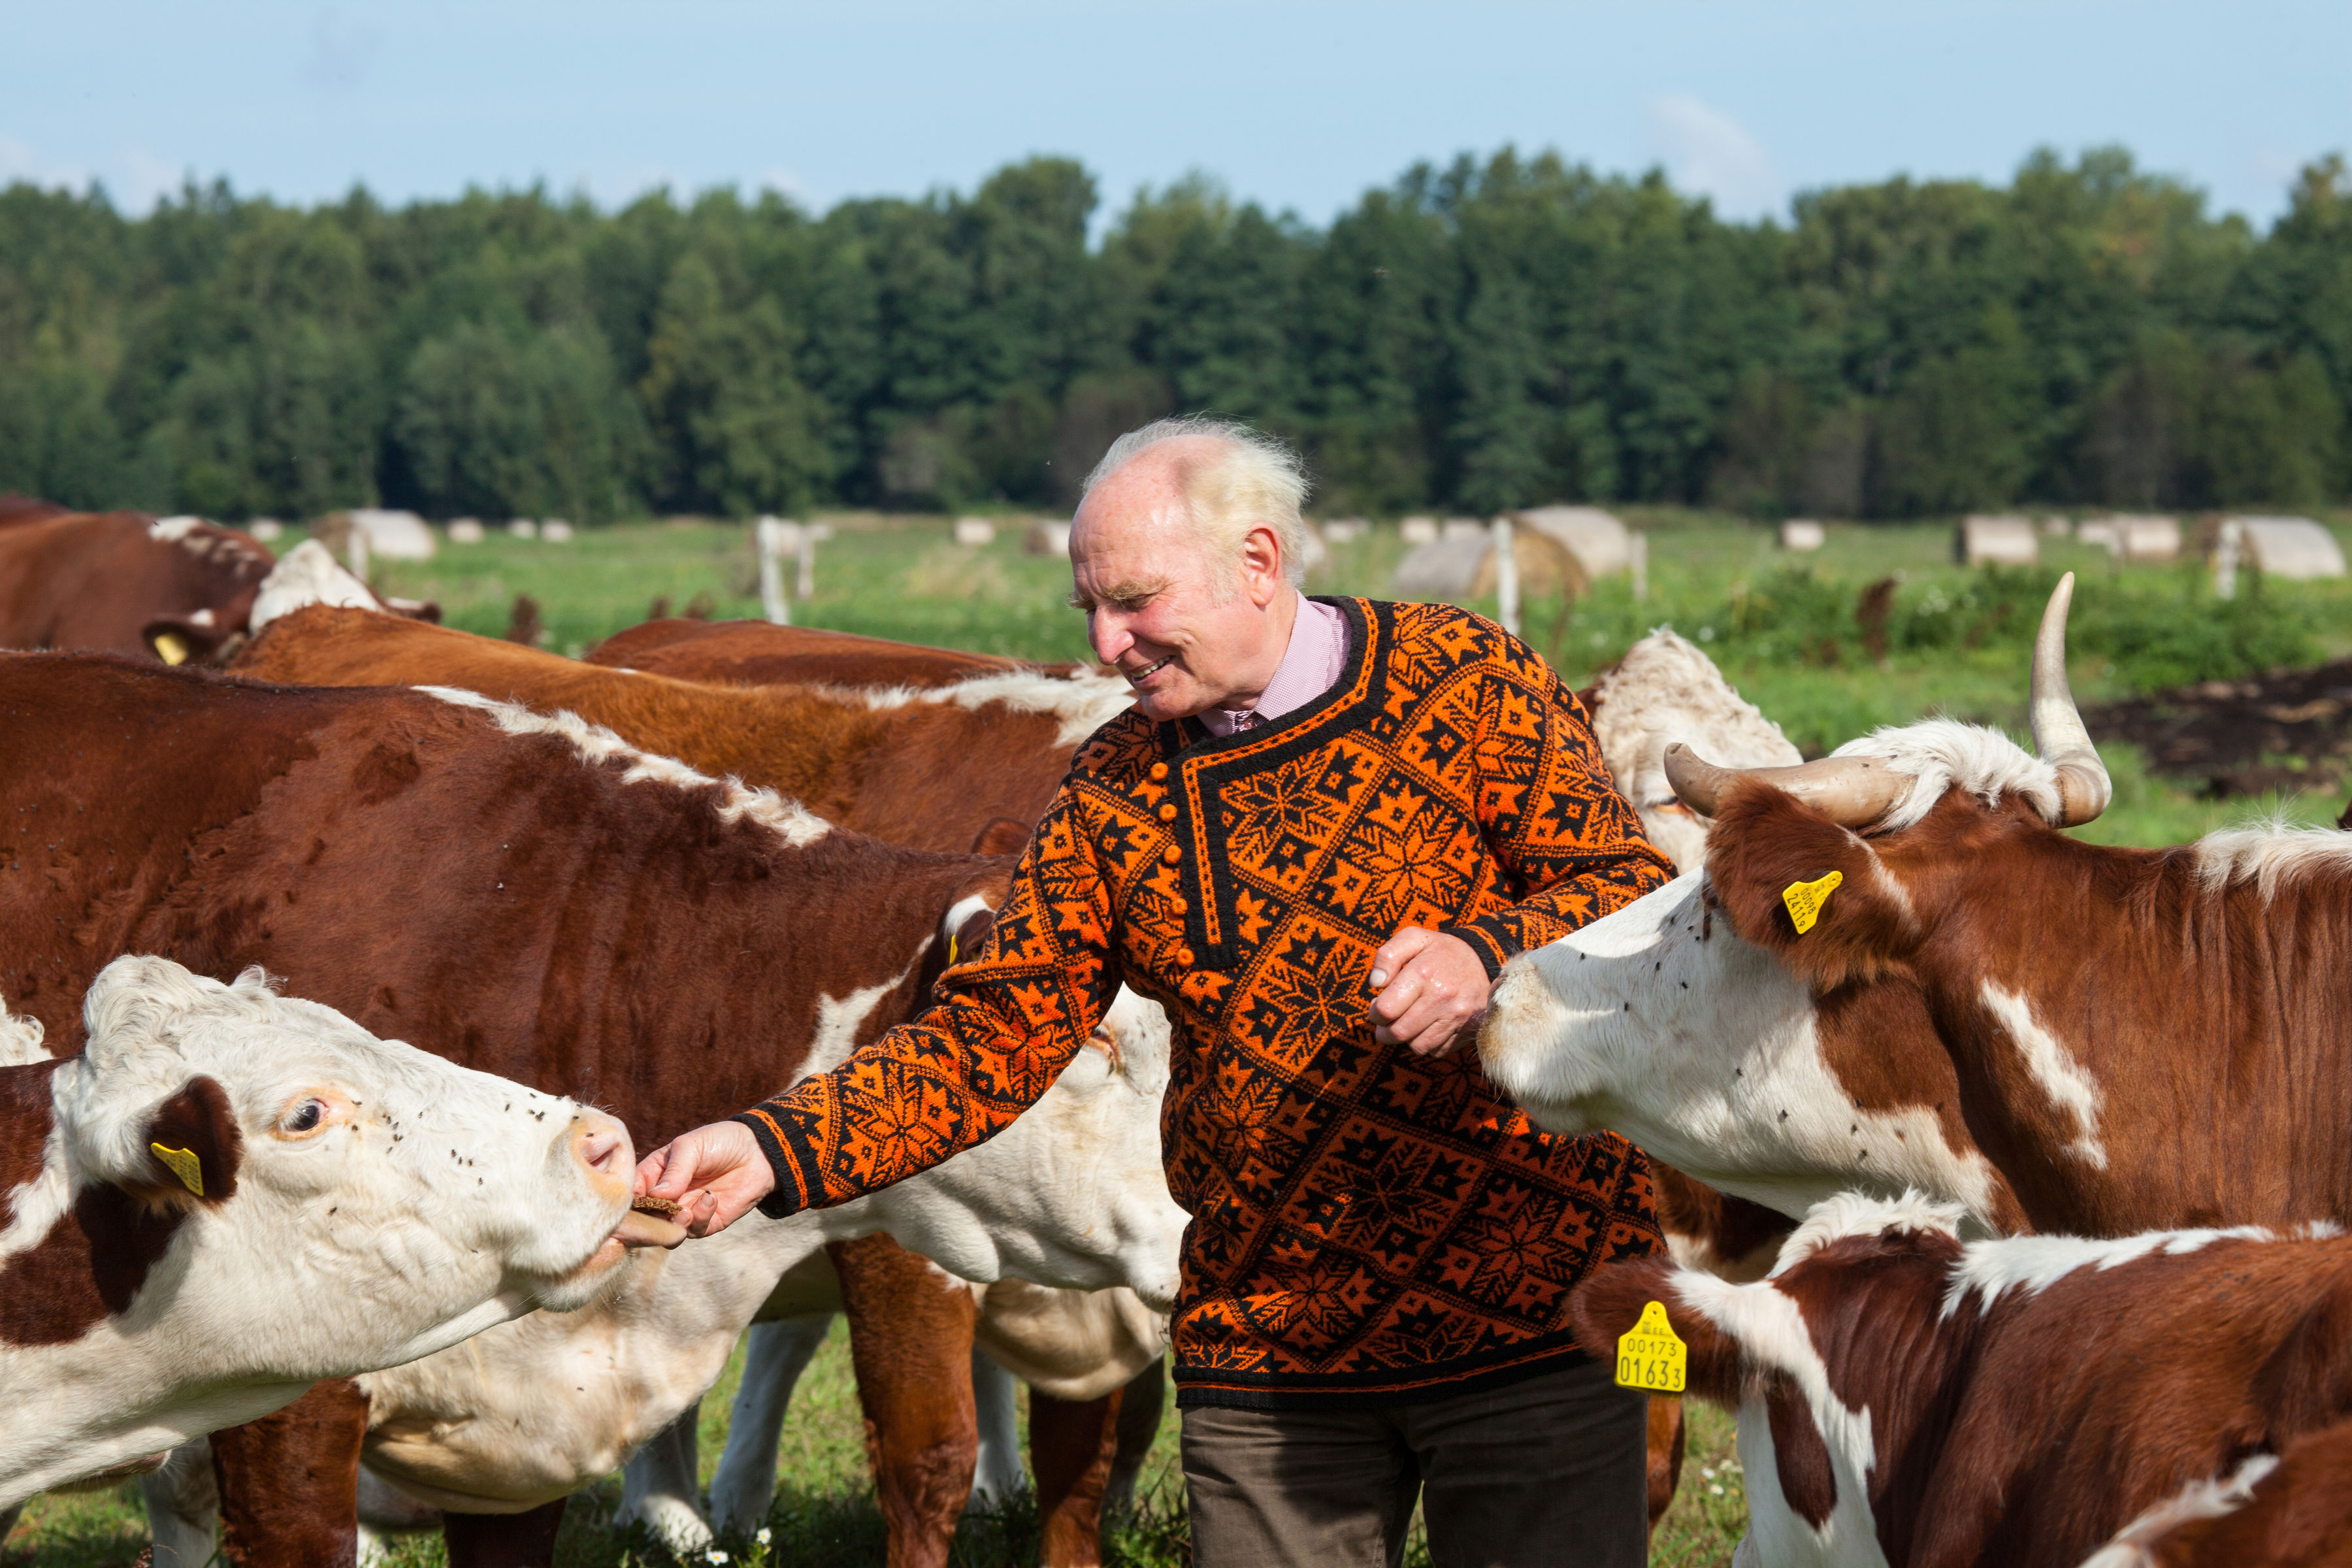 Man feeding cows wearing traditional knit sweater